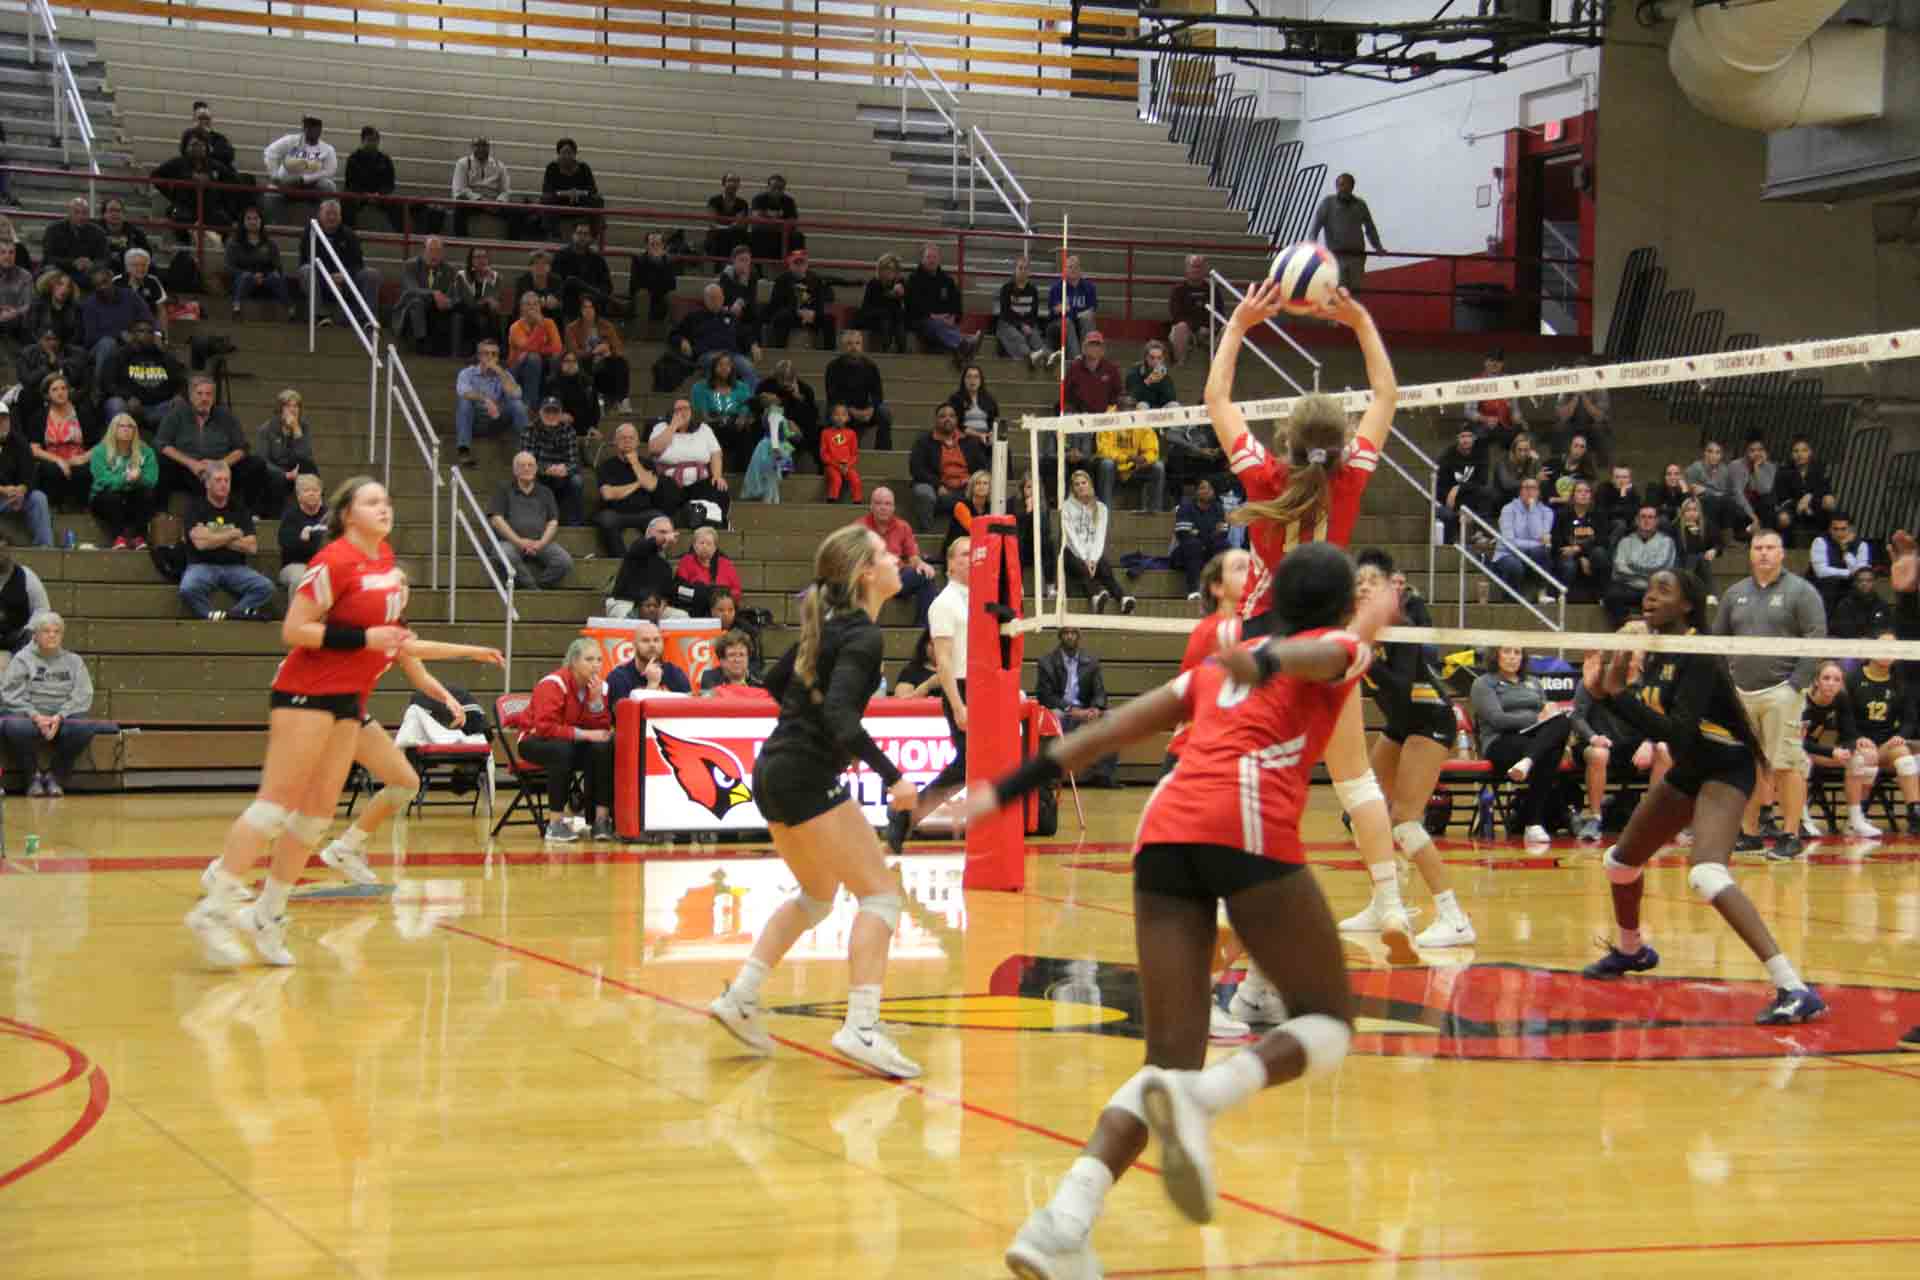 volleyball-sectional-final-vs-marian-catholic-13